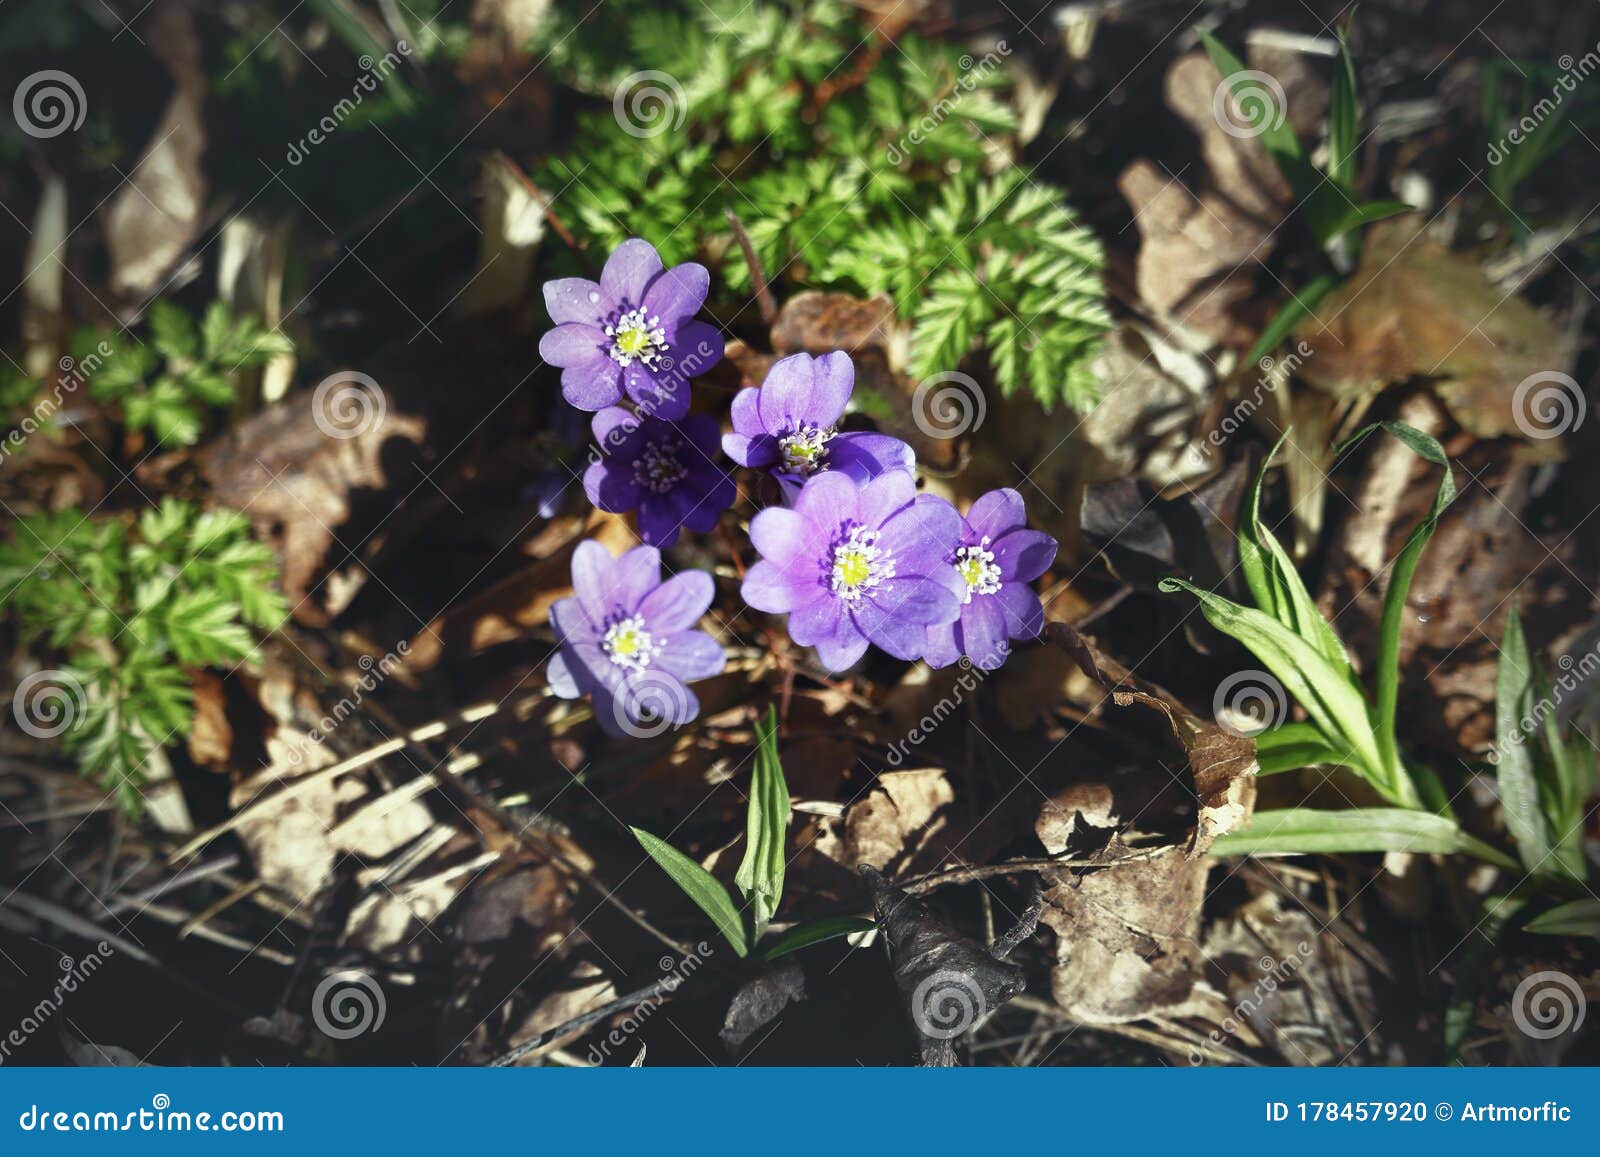 Violet Snowdrop Flowers On Sunny Day In Last Year Brown Leaves Stock Photo Image Of Floral Head 178457920